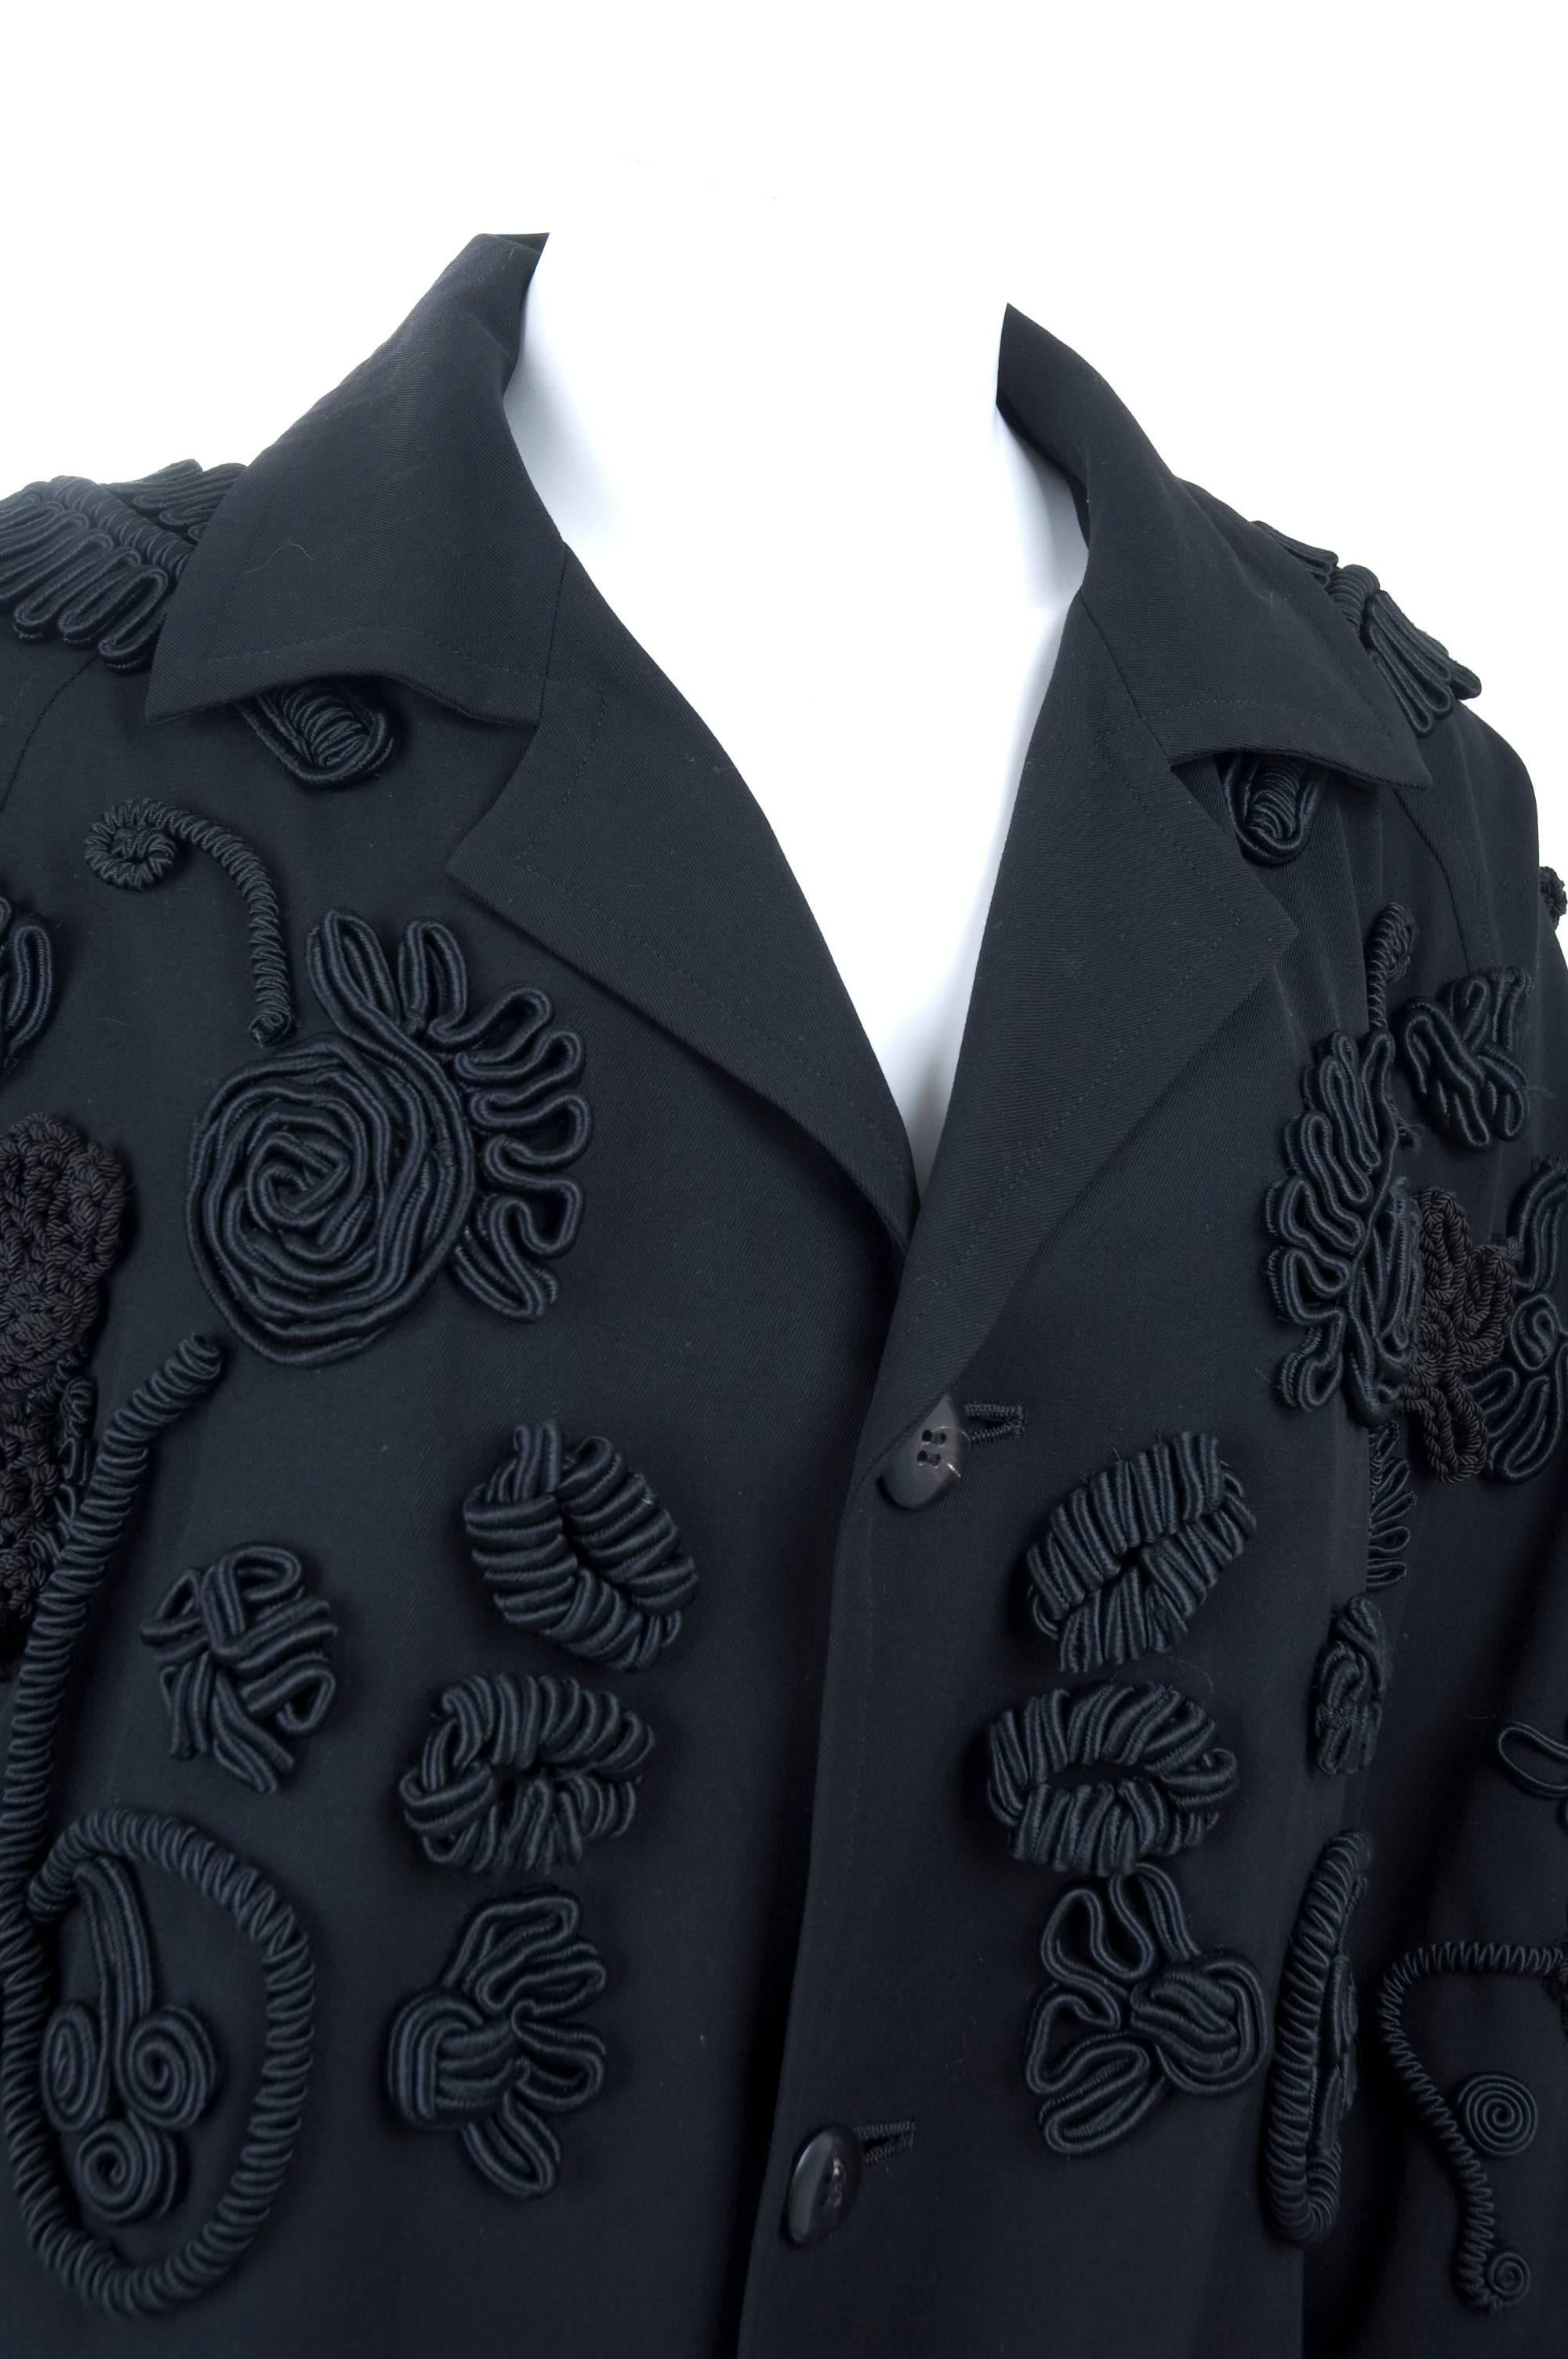 90's Yohji Yamamoto Black Coat with Corded Embroidery + Tassels Allover. For Sale 3